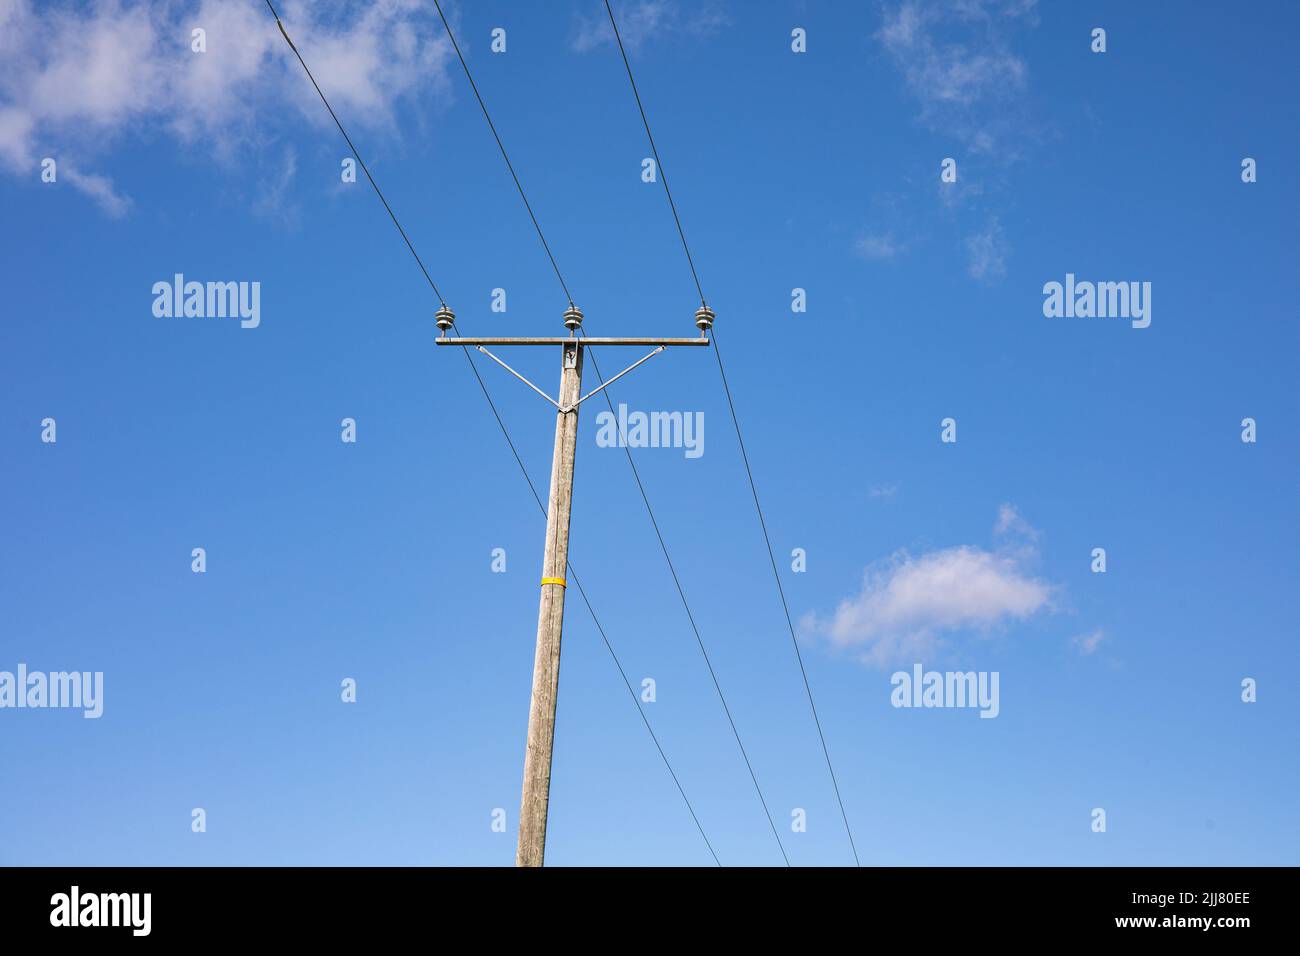 Old wooden utility pole or electric pole against blue sky Stock Photo